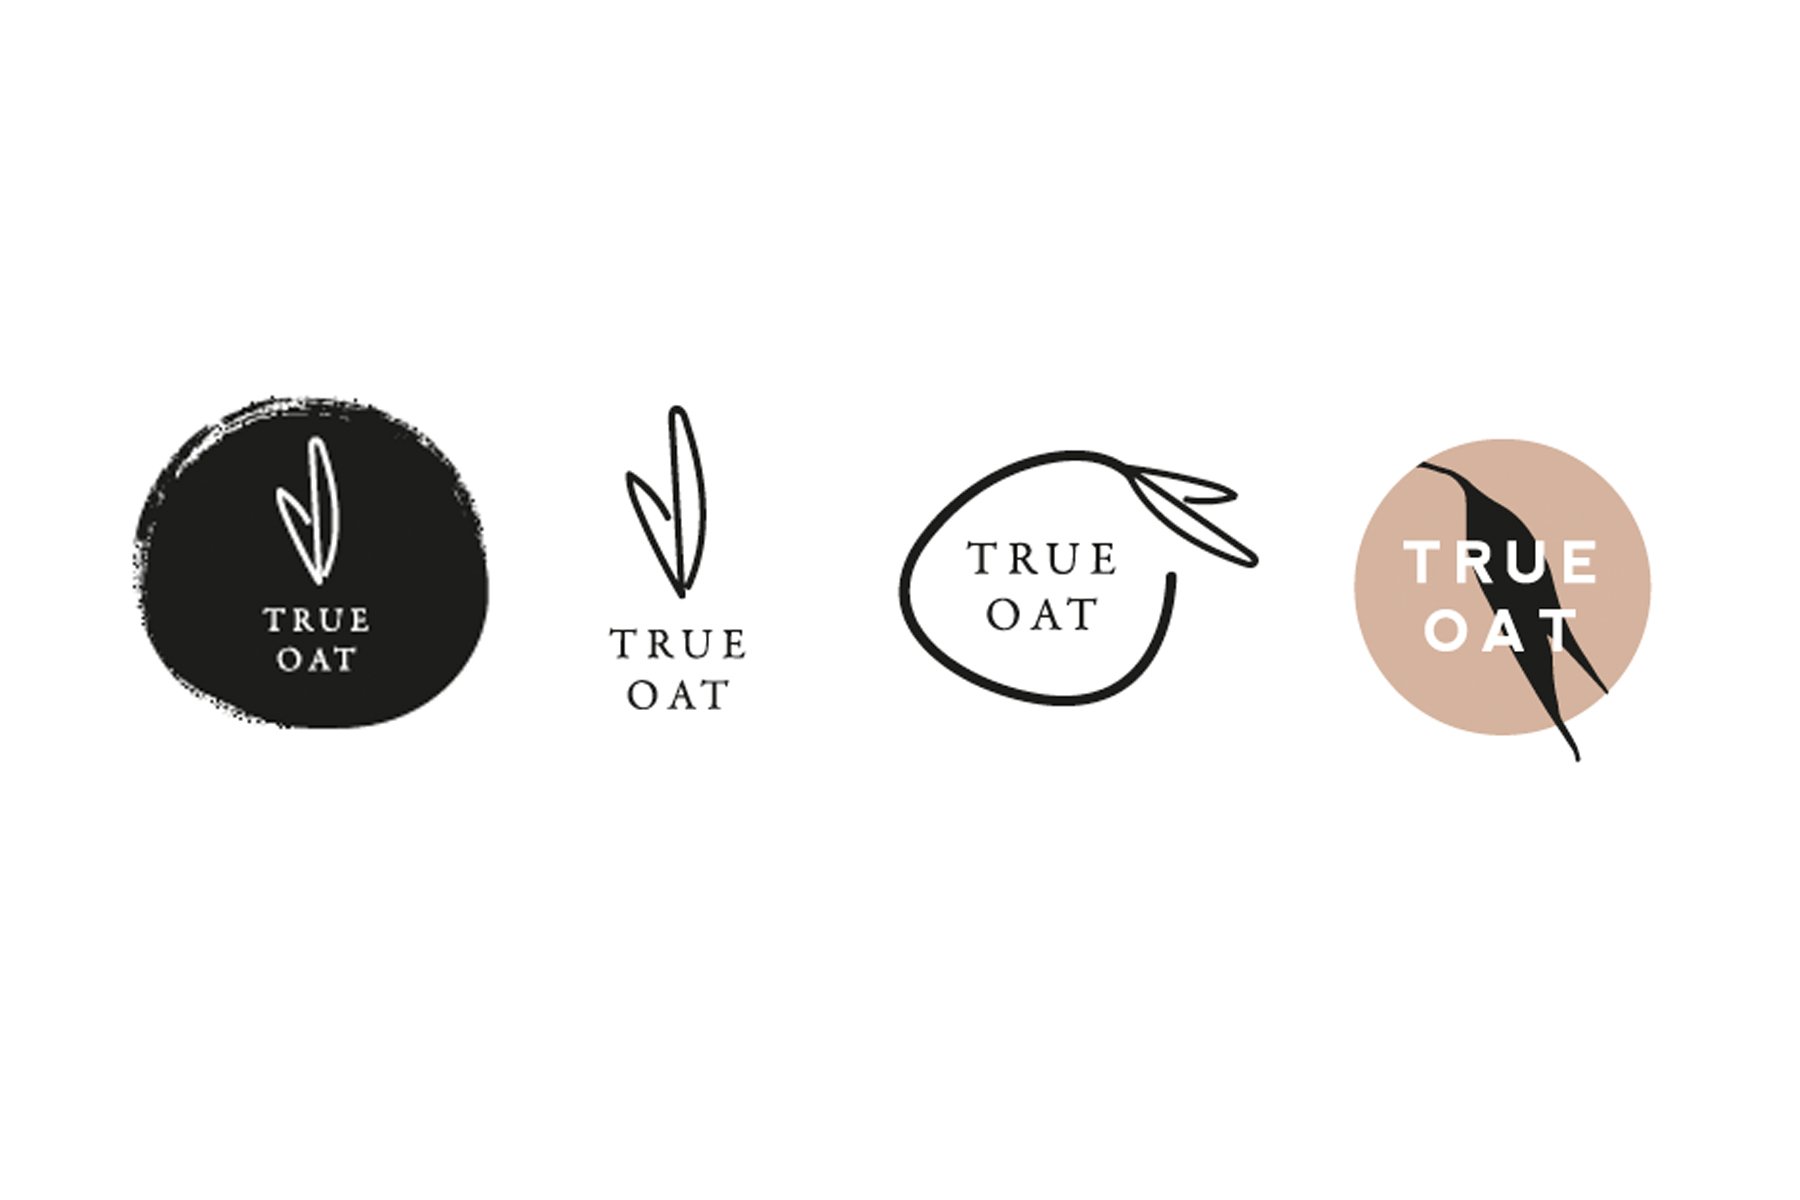  True Oat Options by  Claire Heffer Design  